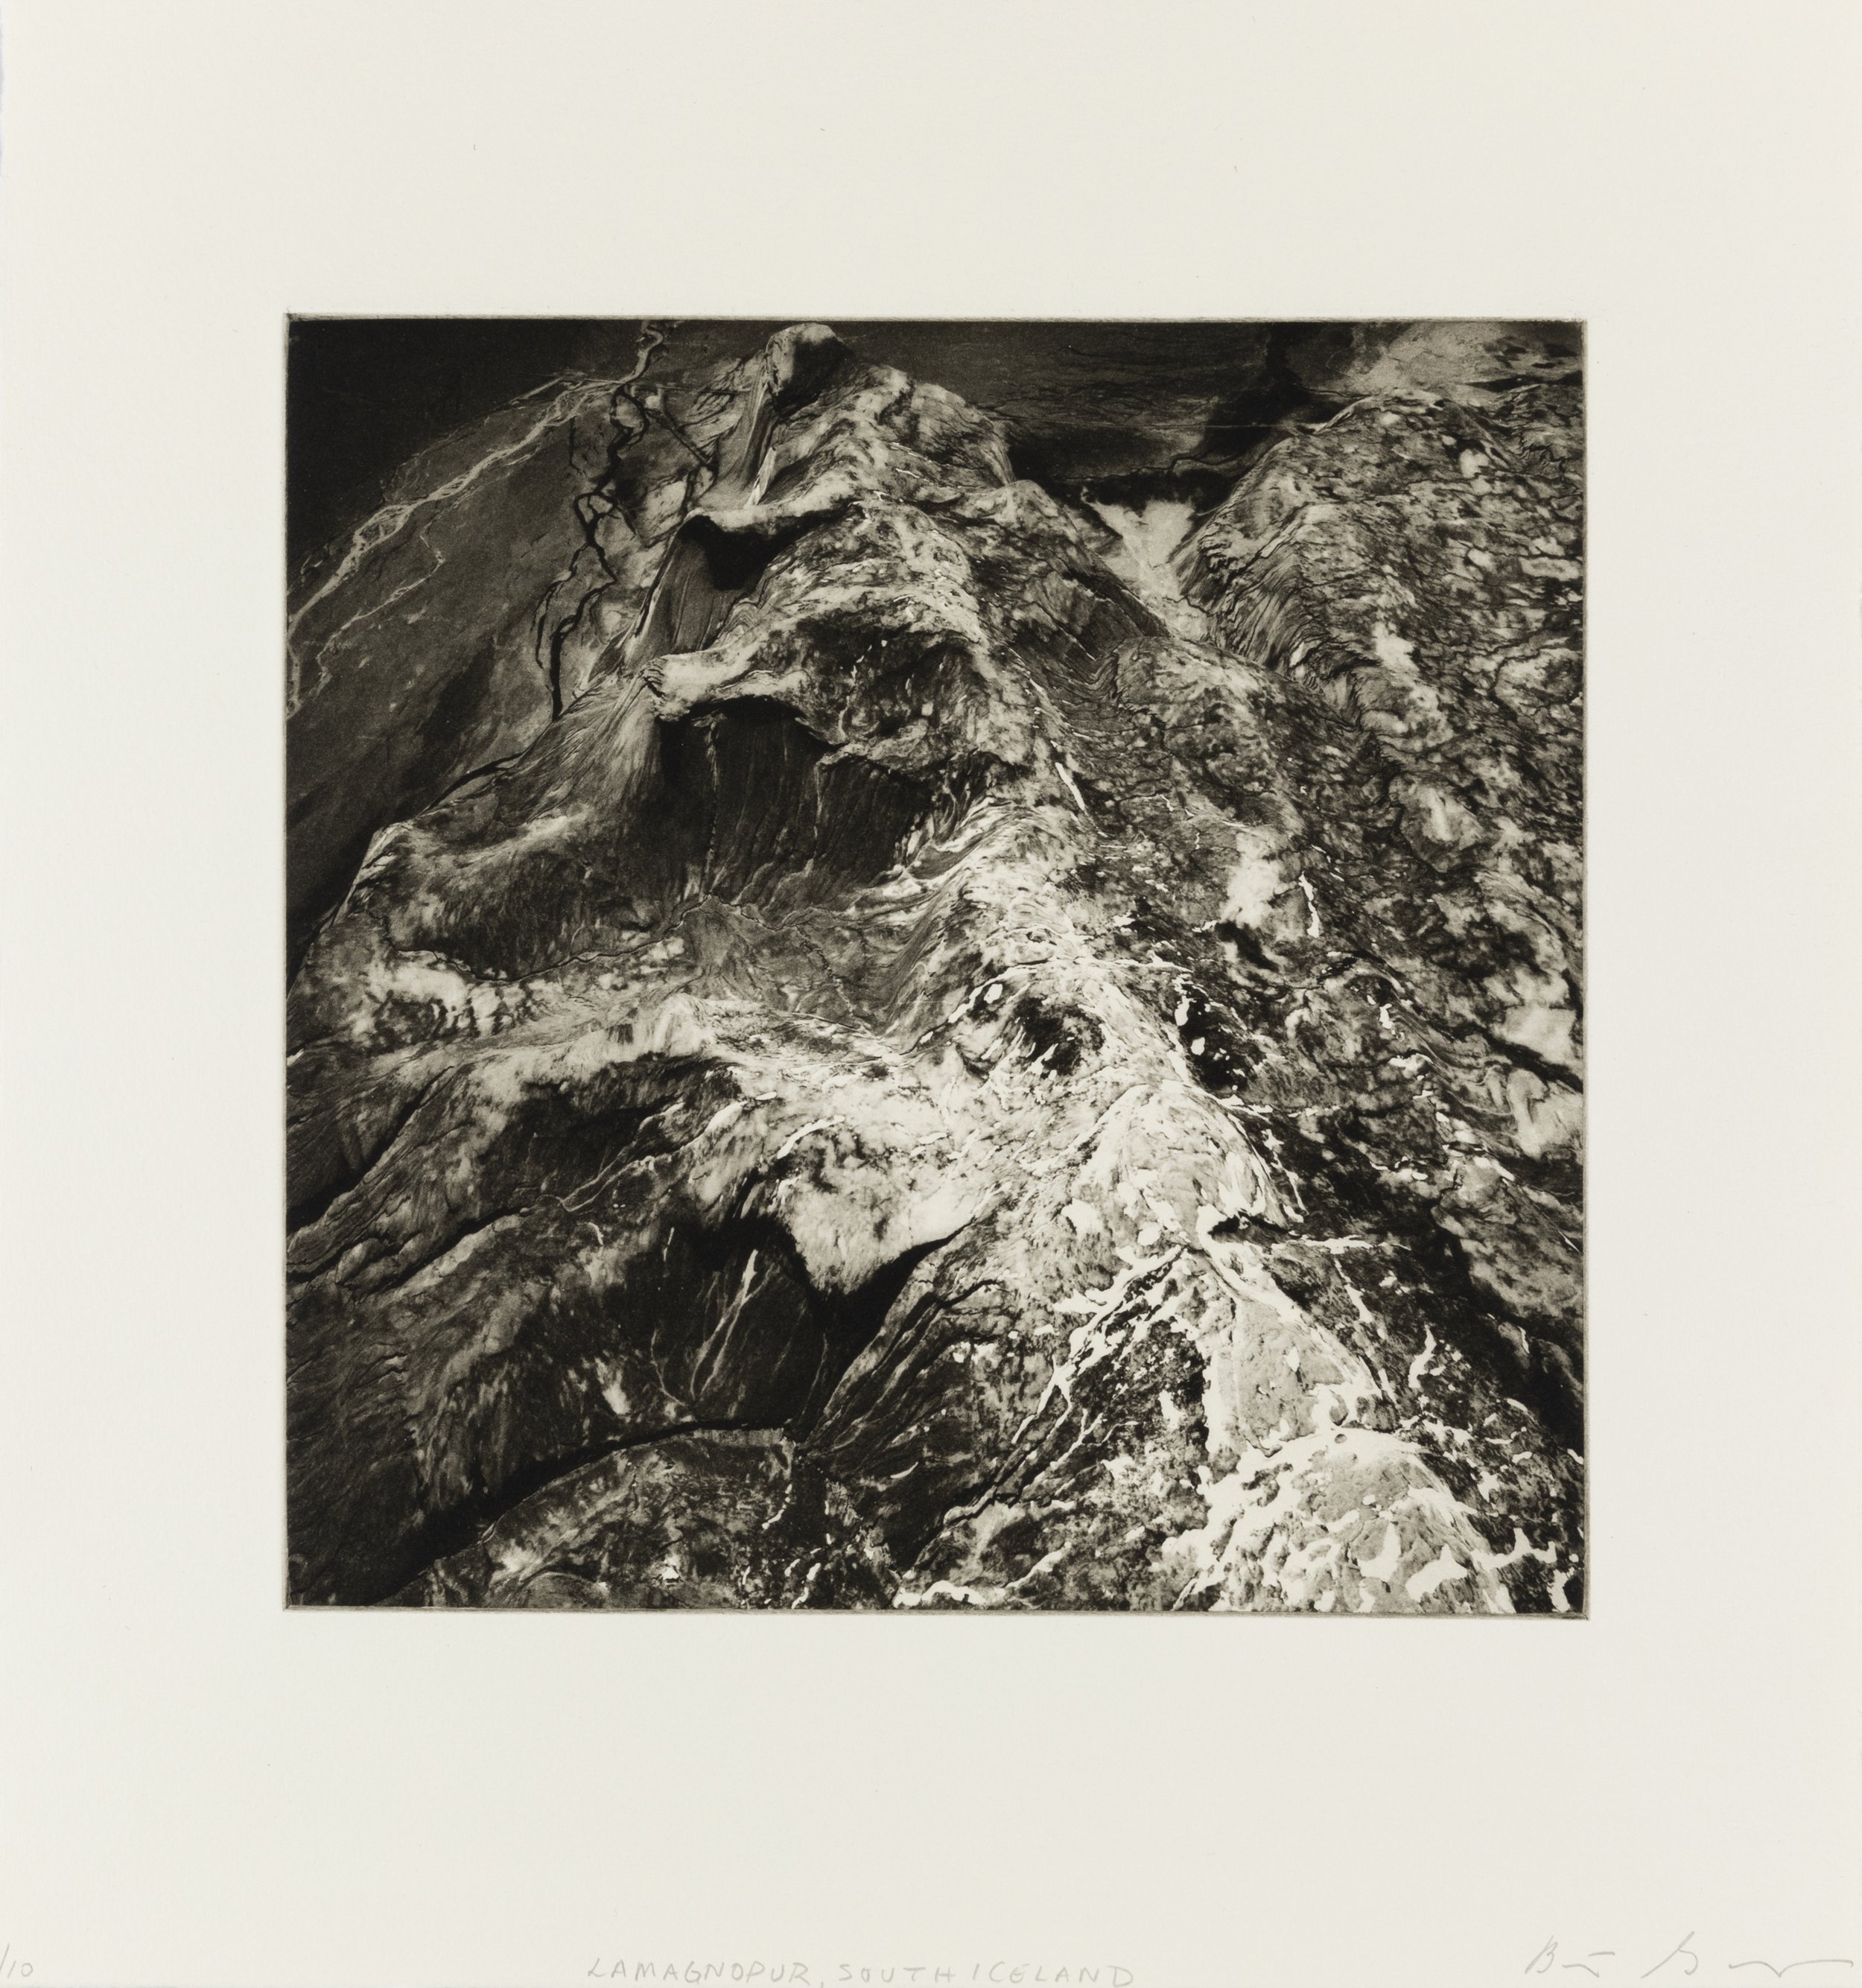    Lomagnopur, South Iceland, 2021   Copperplate photogravure etching on cotton rag paper, plate size; 10.6 x 10.6, paper size; 16 x 15.5, edition 10  